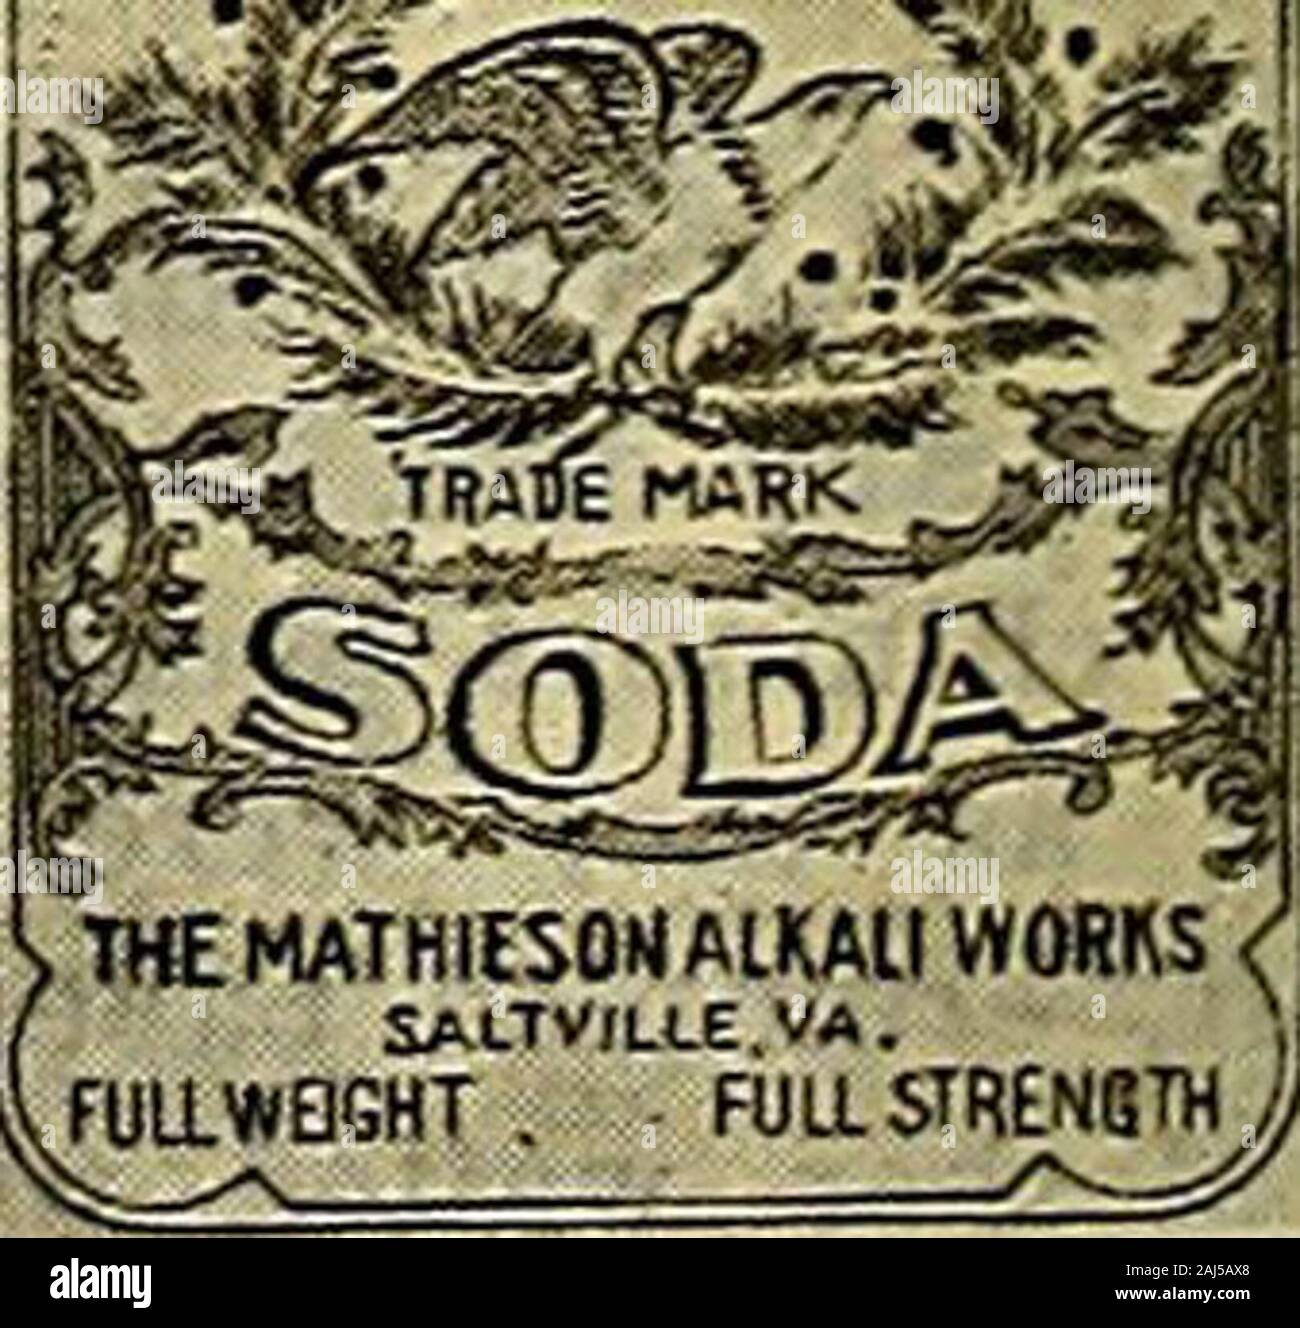 North Carolina Christian advocate [serial] . COTTON GINSCOTTON SEED OIL MILL &FERTILIZER MACHINERYGASOLINE S STEAM ENGINES FOR PRICES WRITE VAN WINKLE GIN & MACHINE CO. ATLANTA,GA. IEACLE4HIM BRAND SDDAli IS THE BEST SODA EVERPRODUCED. /r/SFU/f£/ IB 02. PACKAGE FOR ffKASK YOUR GRdCER FDR IT !EAGL£- TH/STLE COOK BOOKSENT Fff££ O/V ffEQUES TTHE MATHIESON ALKALI WORKS, SALTVILLE,VA. ^-?^ ^---^ fSIXTEEN   OUNCES Jc^cle-Thisti. jlT BRAND 5^. Soiled Garments ^Ne^NaniMade To Look New If your garmeDts are soiled, wrinkled, and look shabbyand unilt for wear, dont cast them aside—we can makethem look li Stock Photo